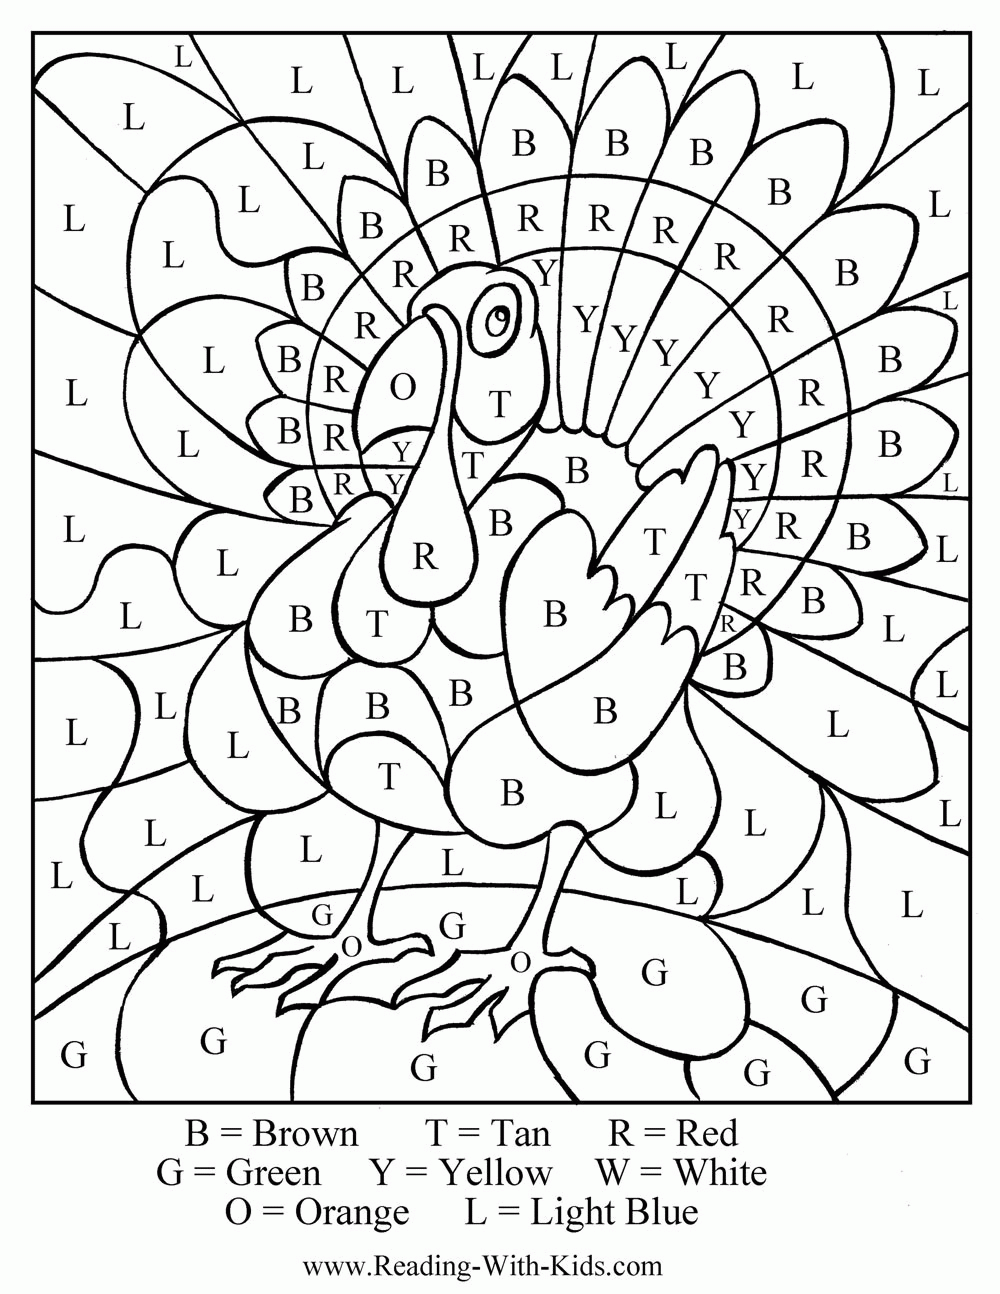 Thanksgiving Coloring Pages To Print For Free   Coloring Home